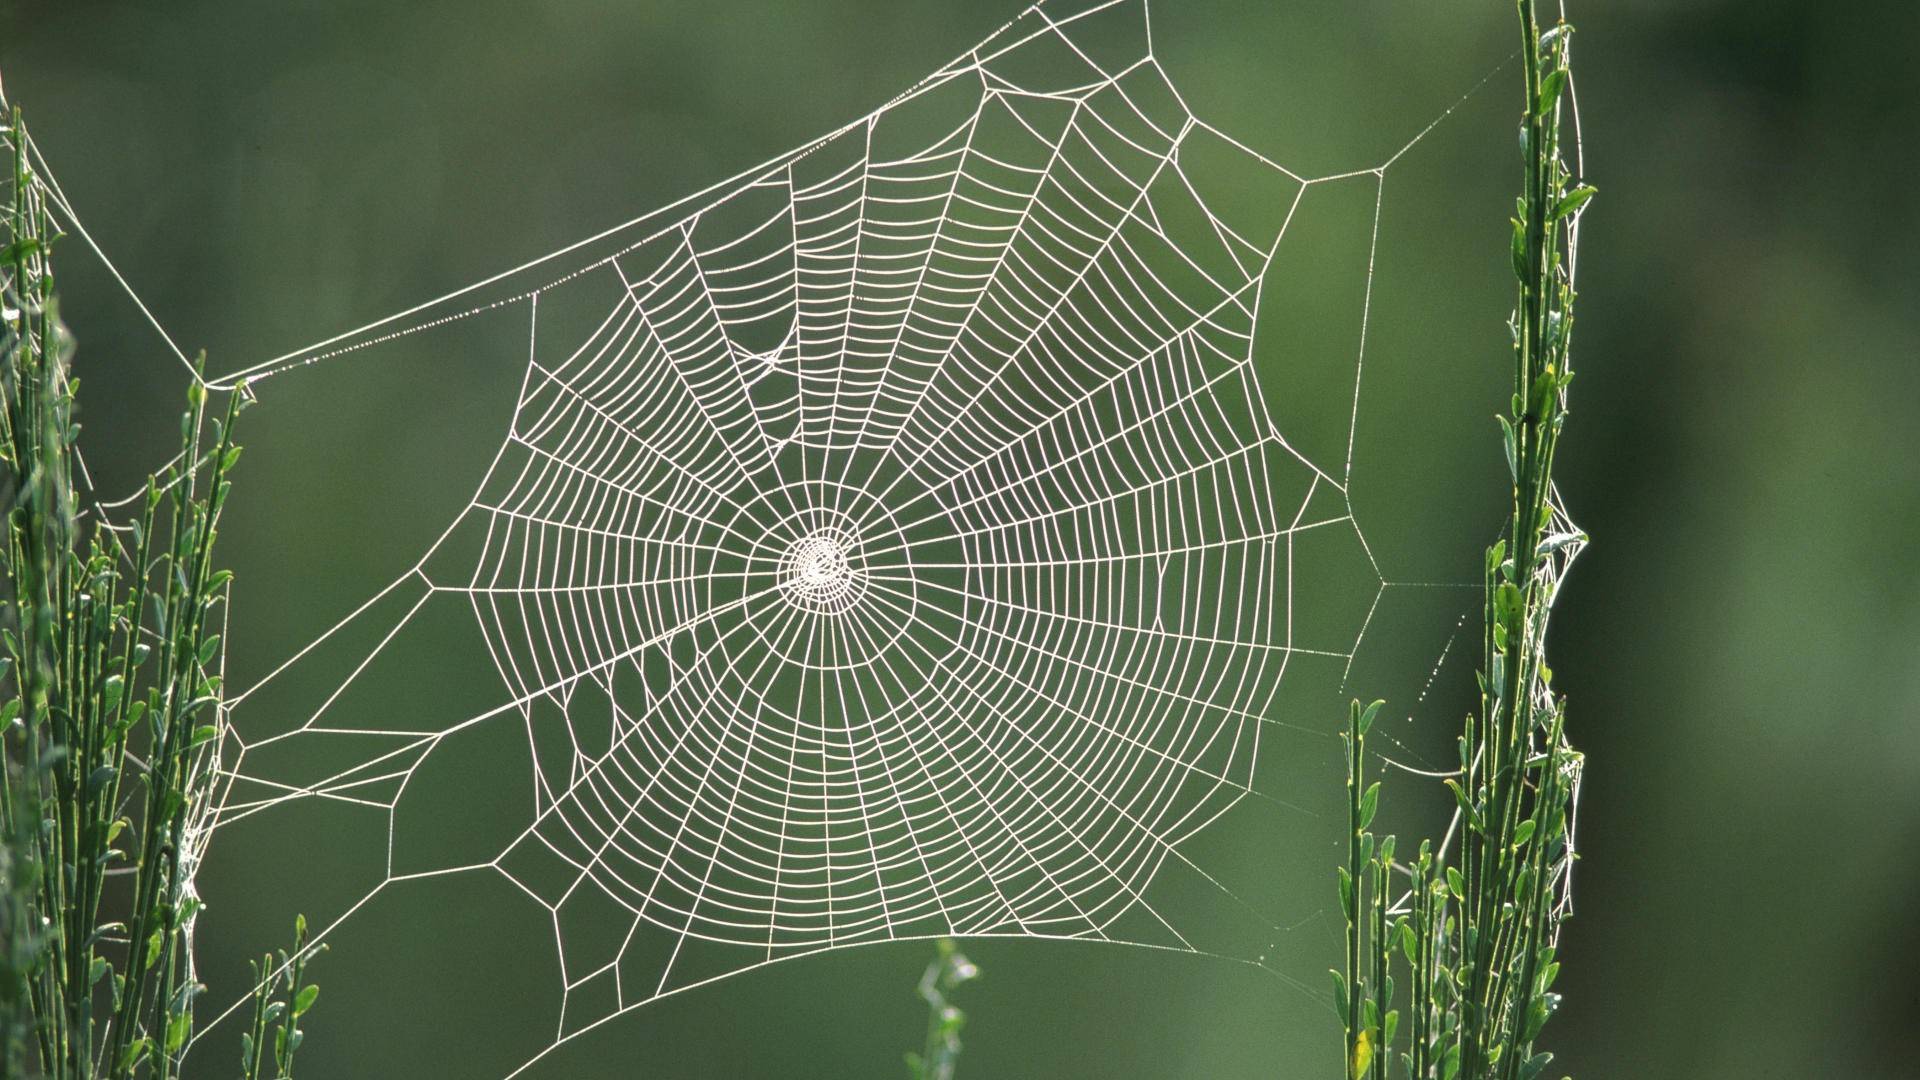 Spider Webs! - Lessons - Tes Teach